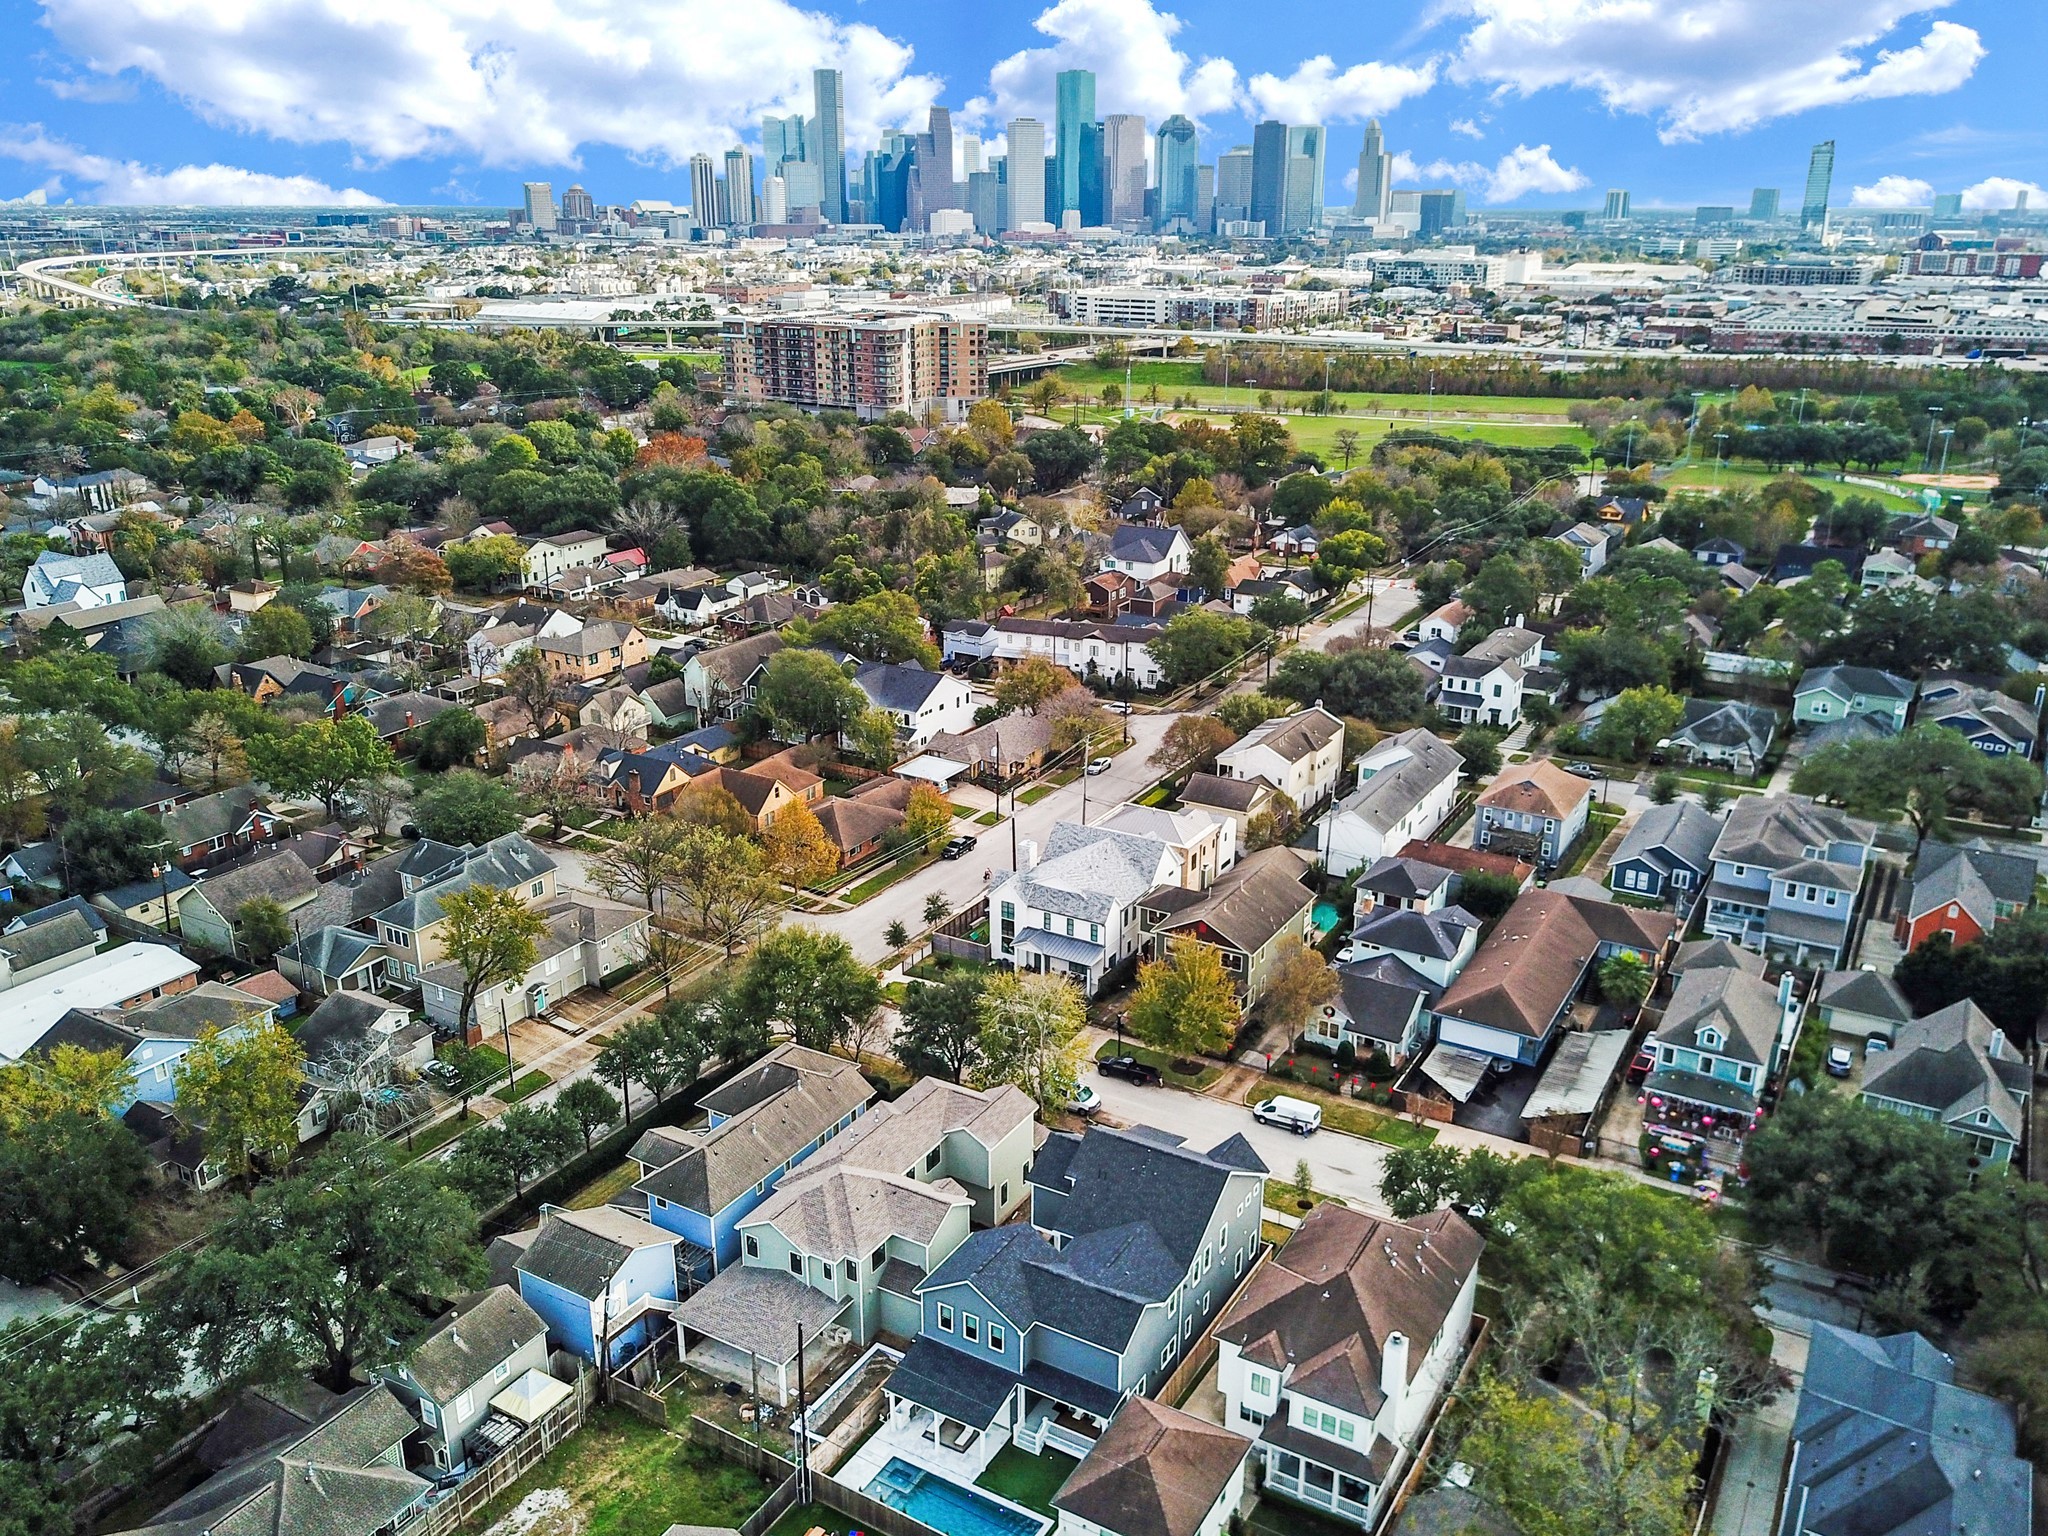 This beautiful block is close to Downtown, fantastic parks, freeways, great local shopping and dining, and top-rated Houston ISD schools, including Travis Elementary.